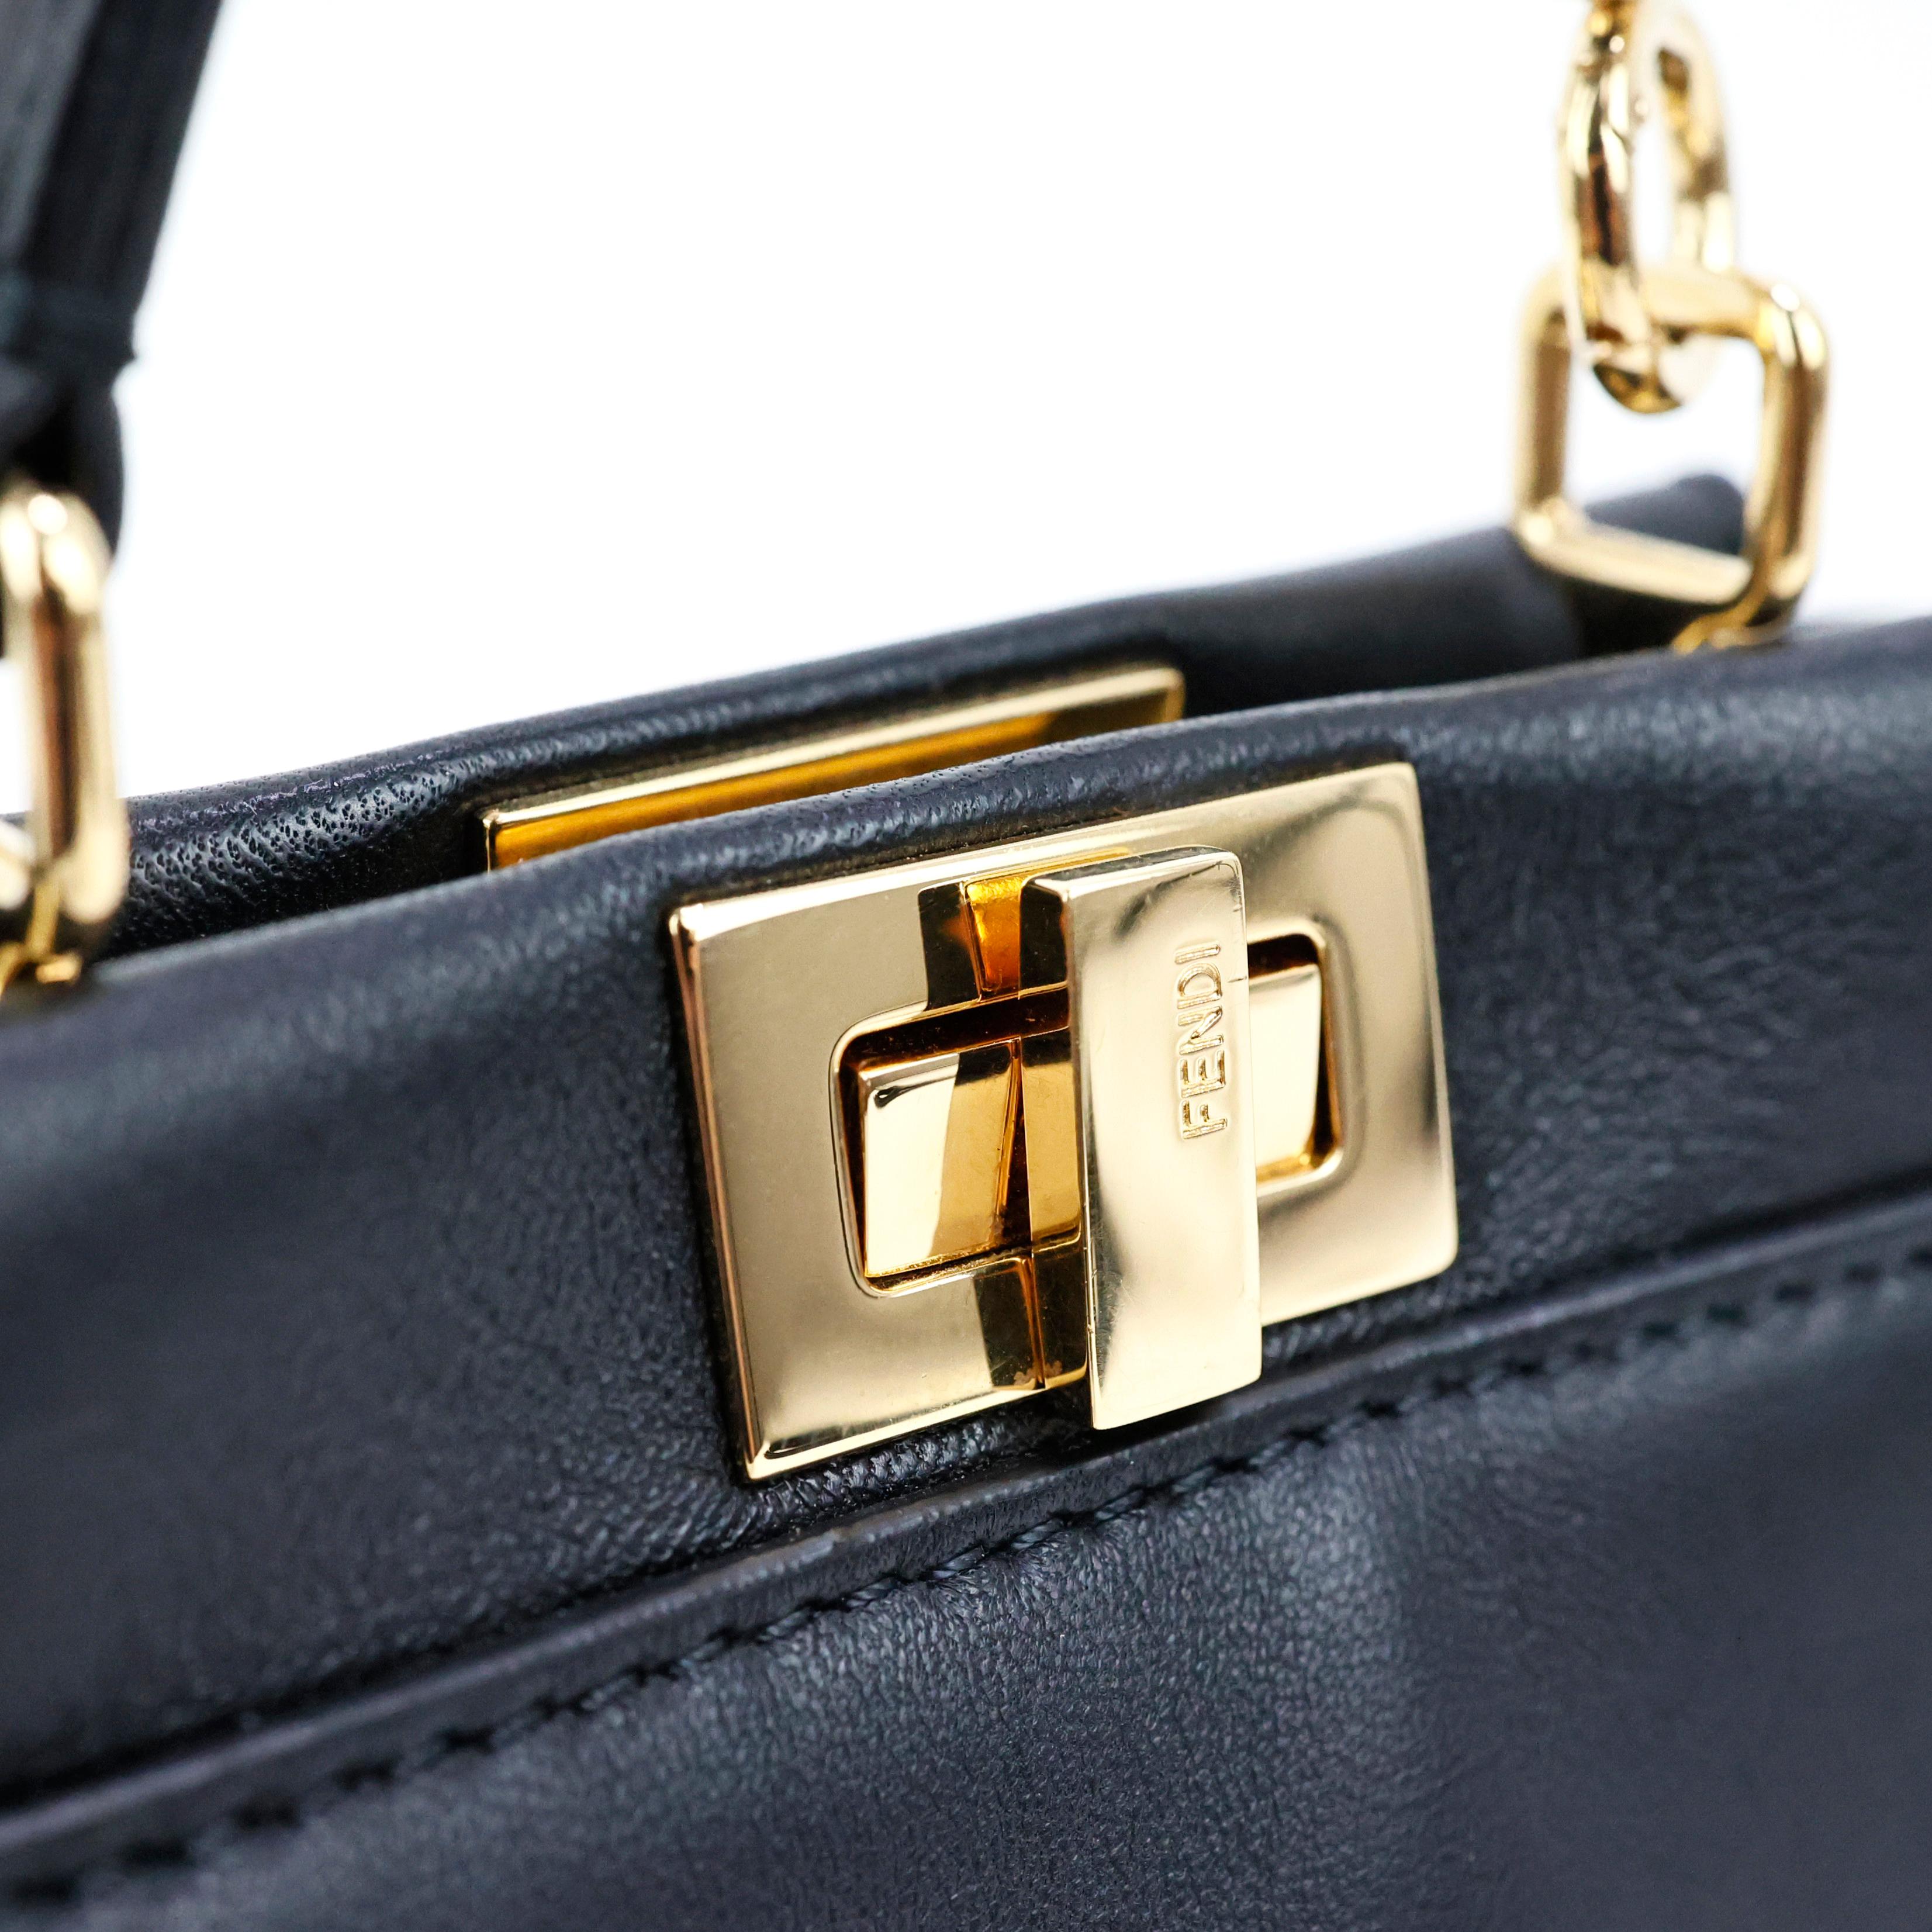 Fendi Peekaboo micro size in nappa leather color black, gold hardware.

Condition:
Really good.

Packing/accessories:
Dustbag, crossbody strap, authenticity card.

Measurements:
15cm x 11cm x 5cm